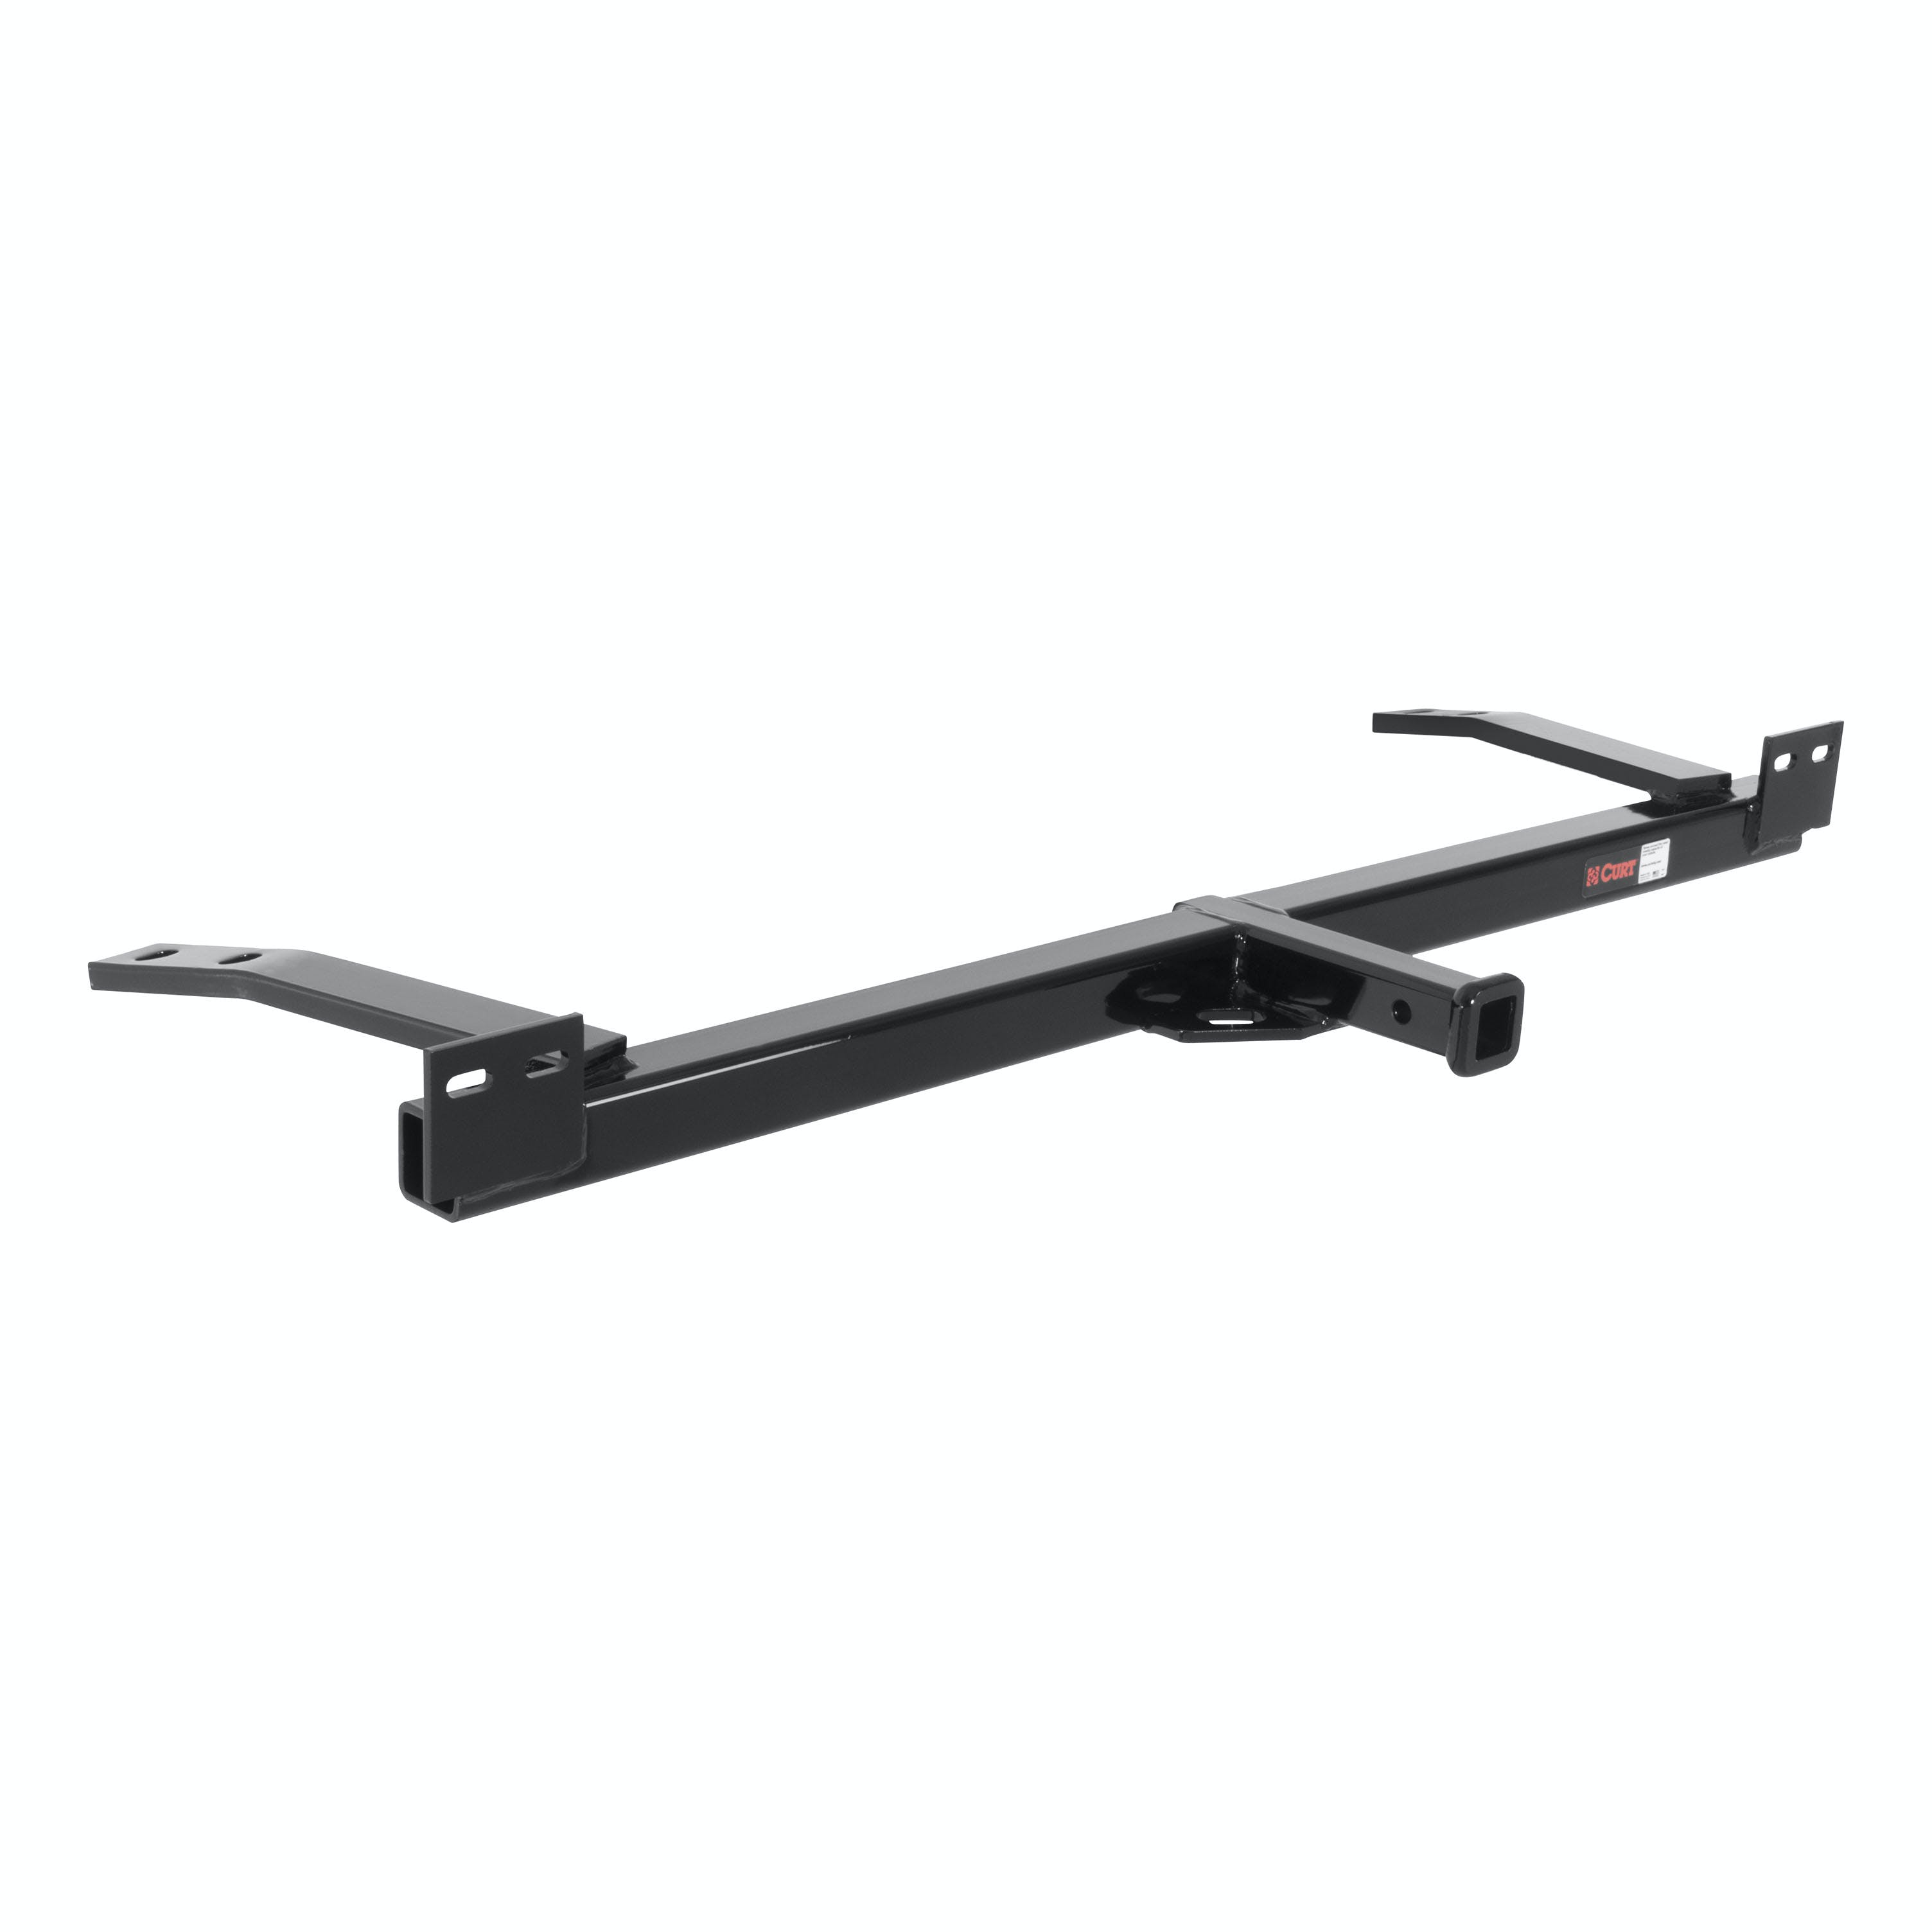 CURT 12009 Class 2 Hitch, 1-1/4, Select Buick, Chevrolet, Oldsmobile, Pontiac (Exposed)